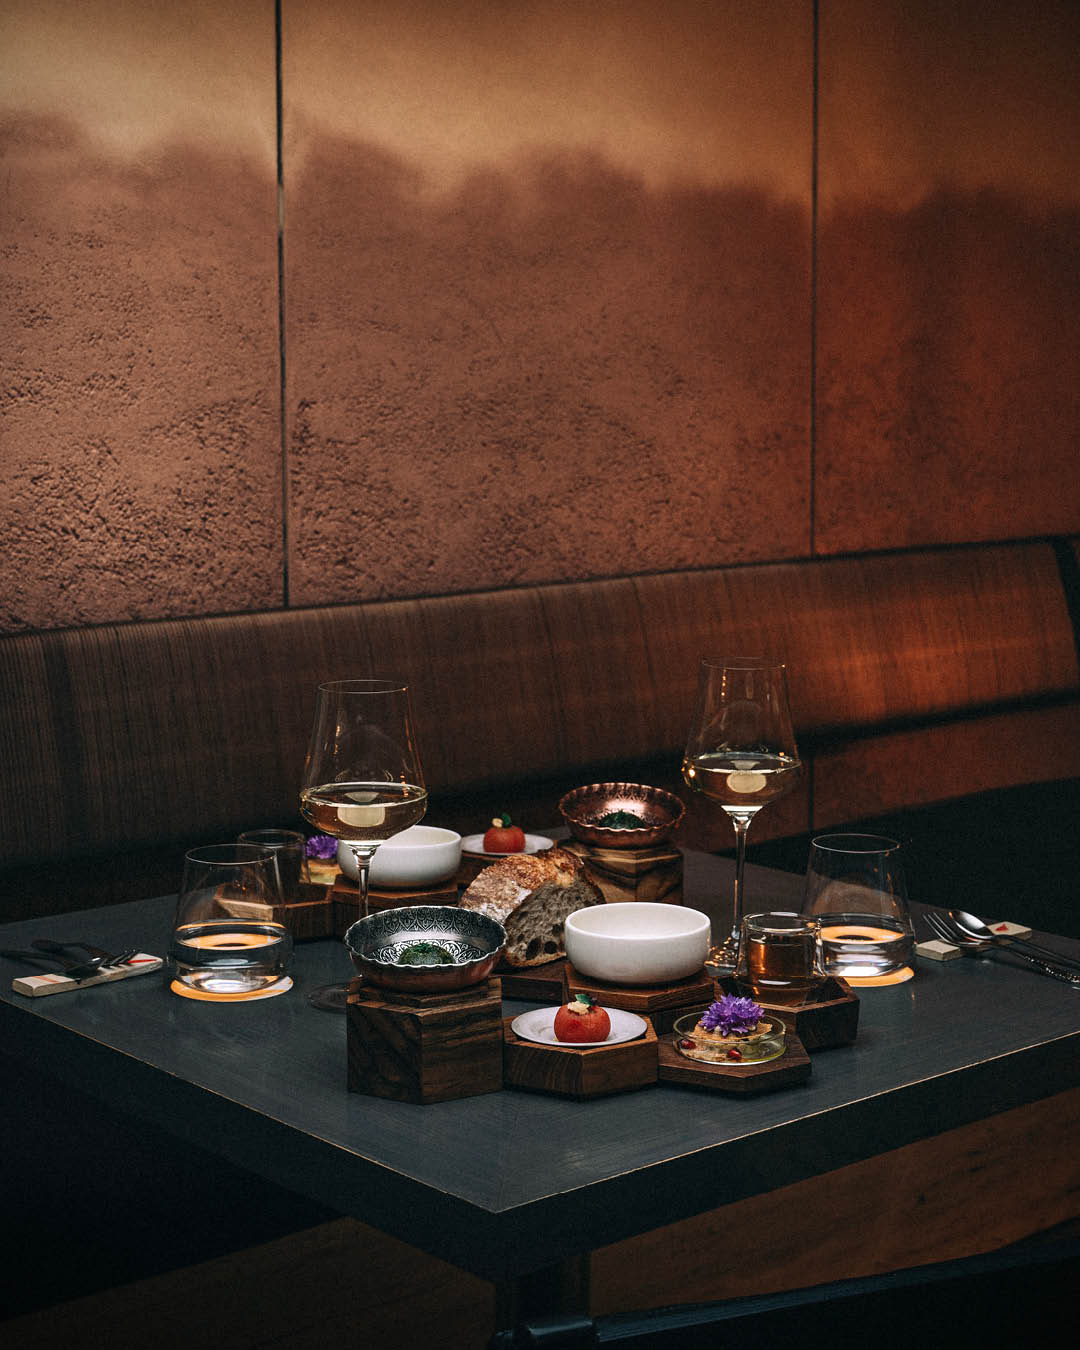 A selection of dishes served on a black table at Nouri, Singapore.